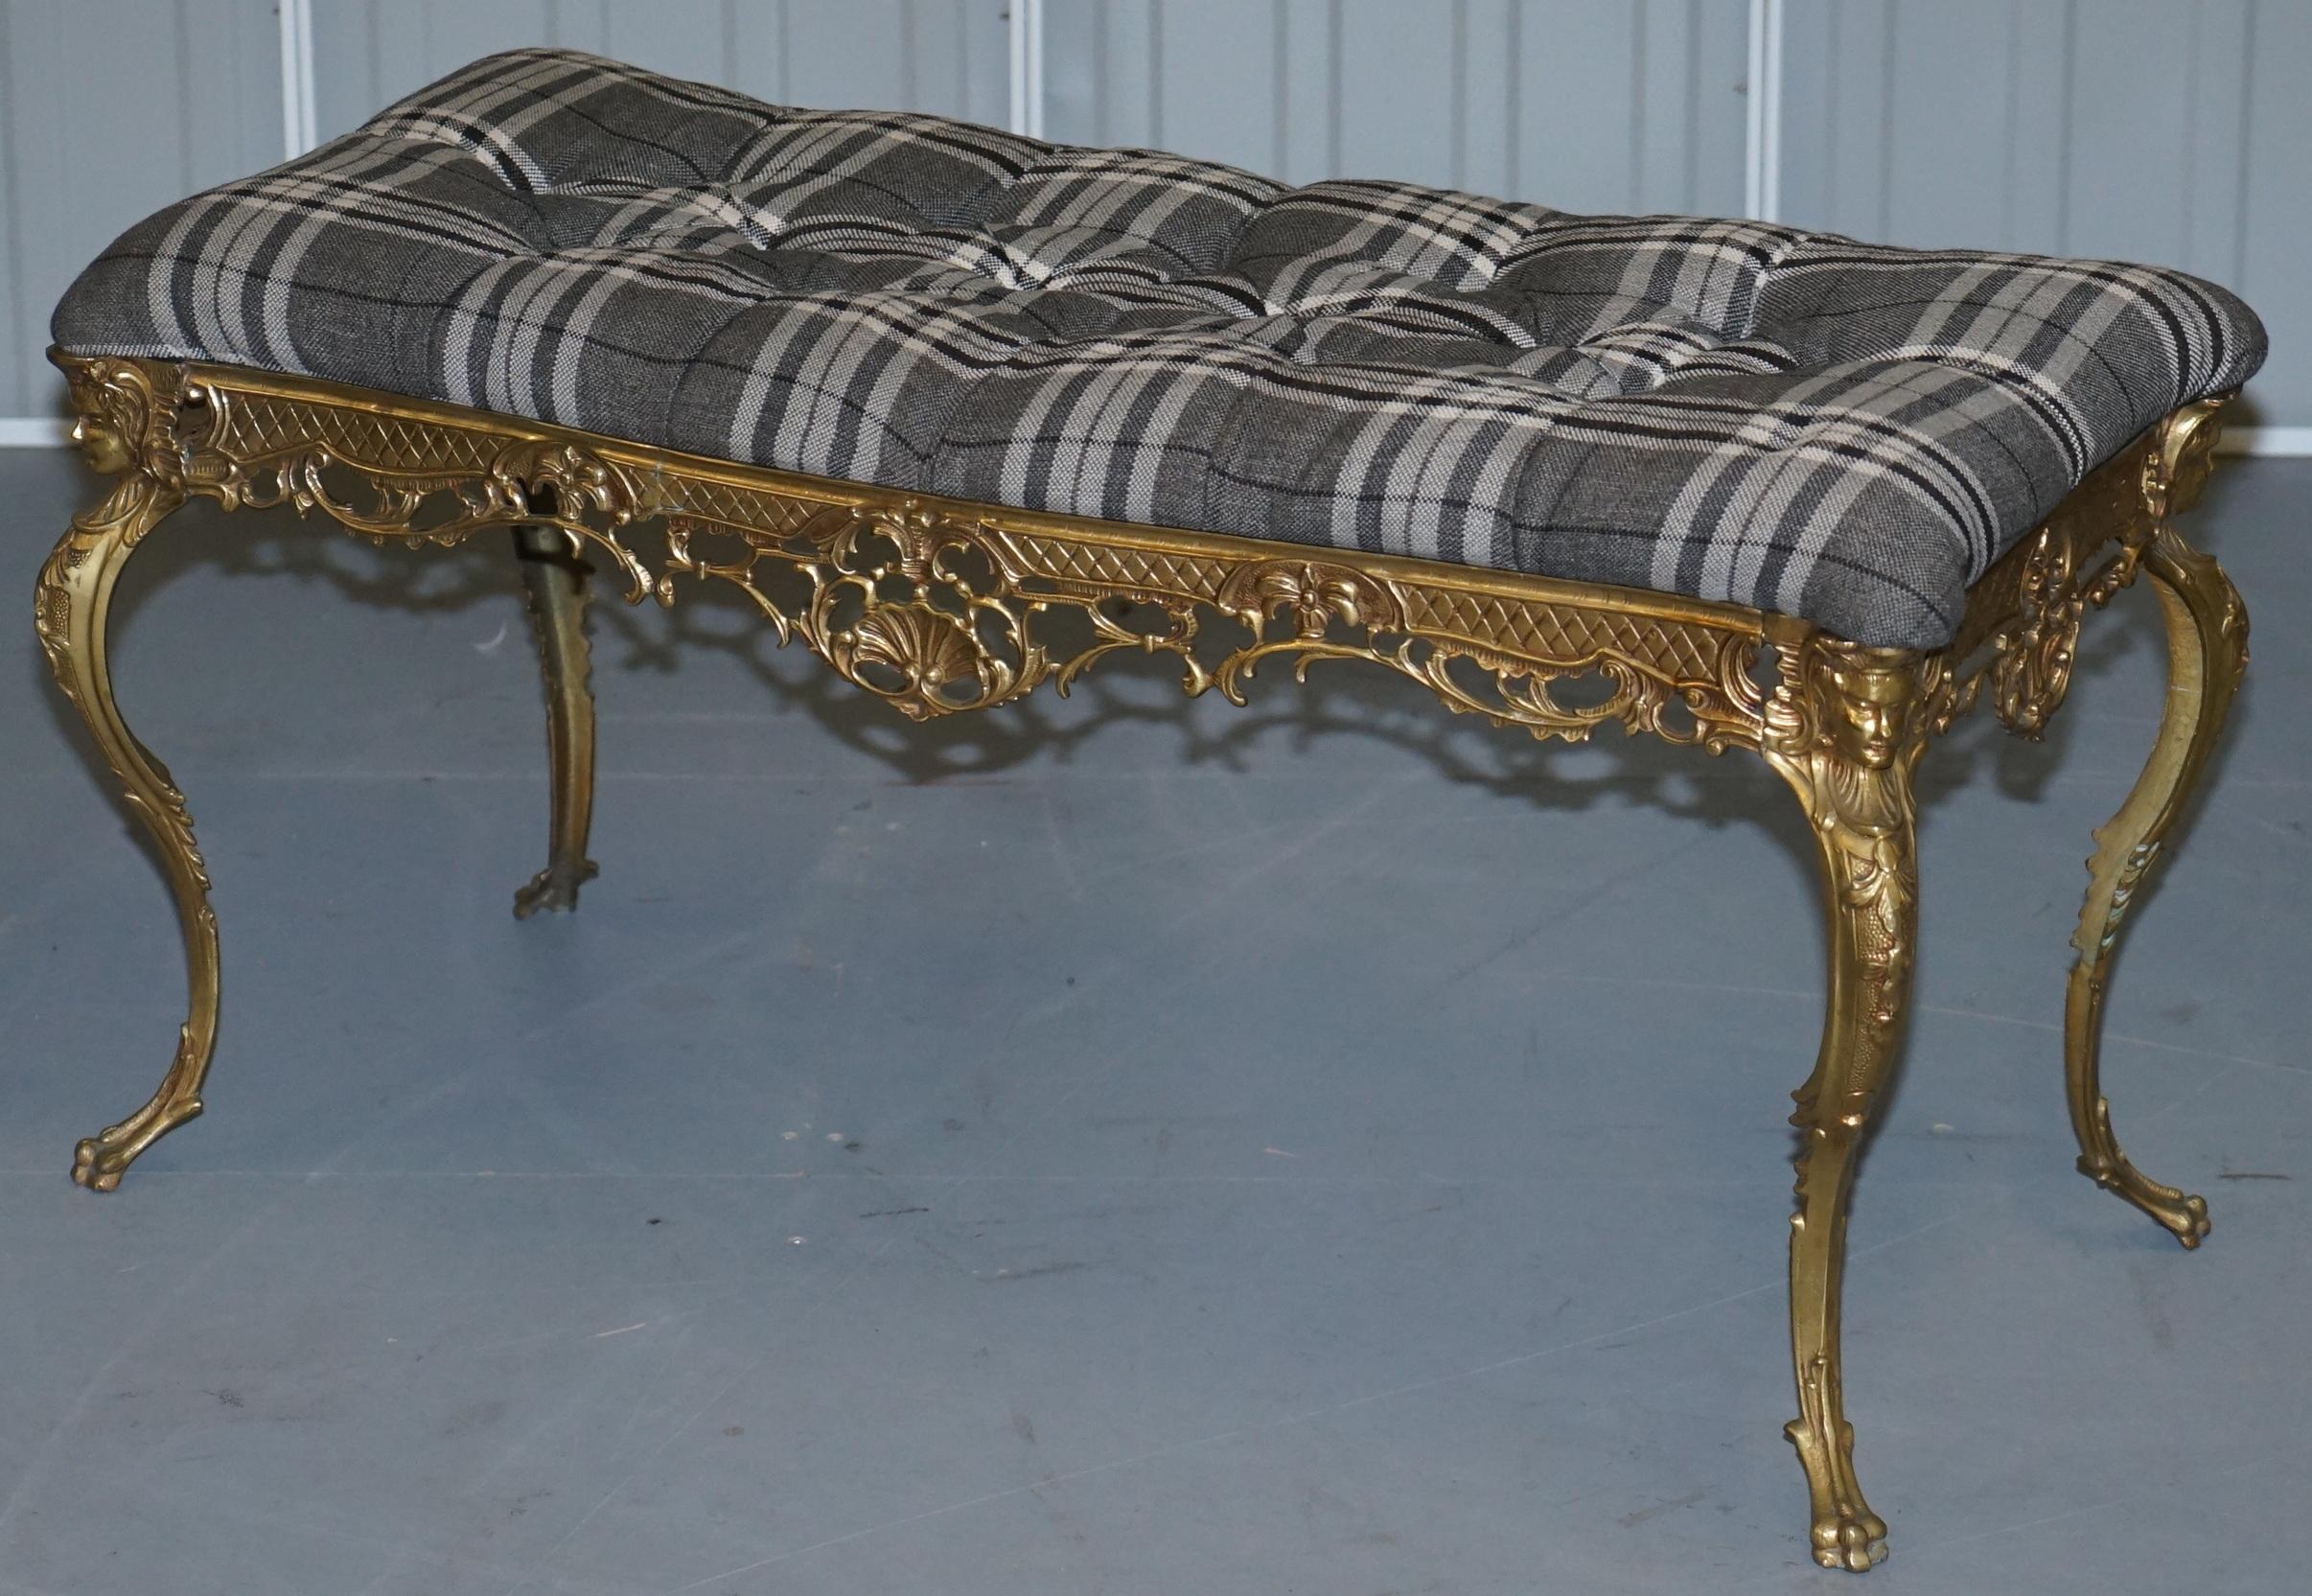 Hand-Crafted Ornate French circa 1920s Gold Gilt Brass Bench New Chesterfield Upholstery